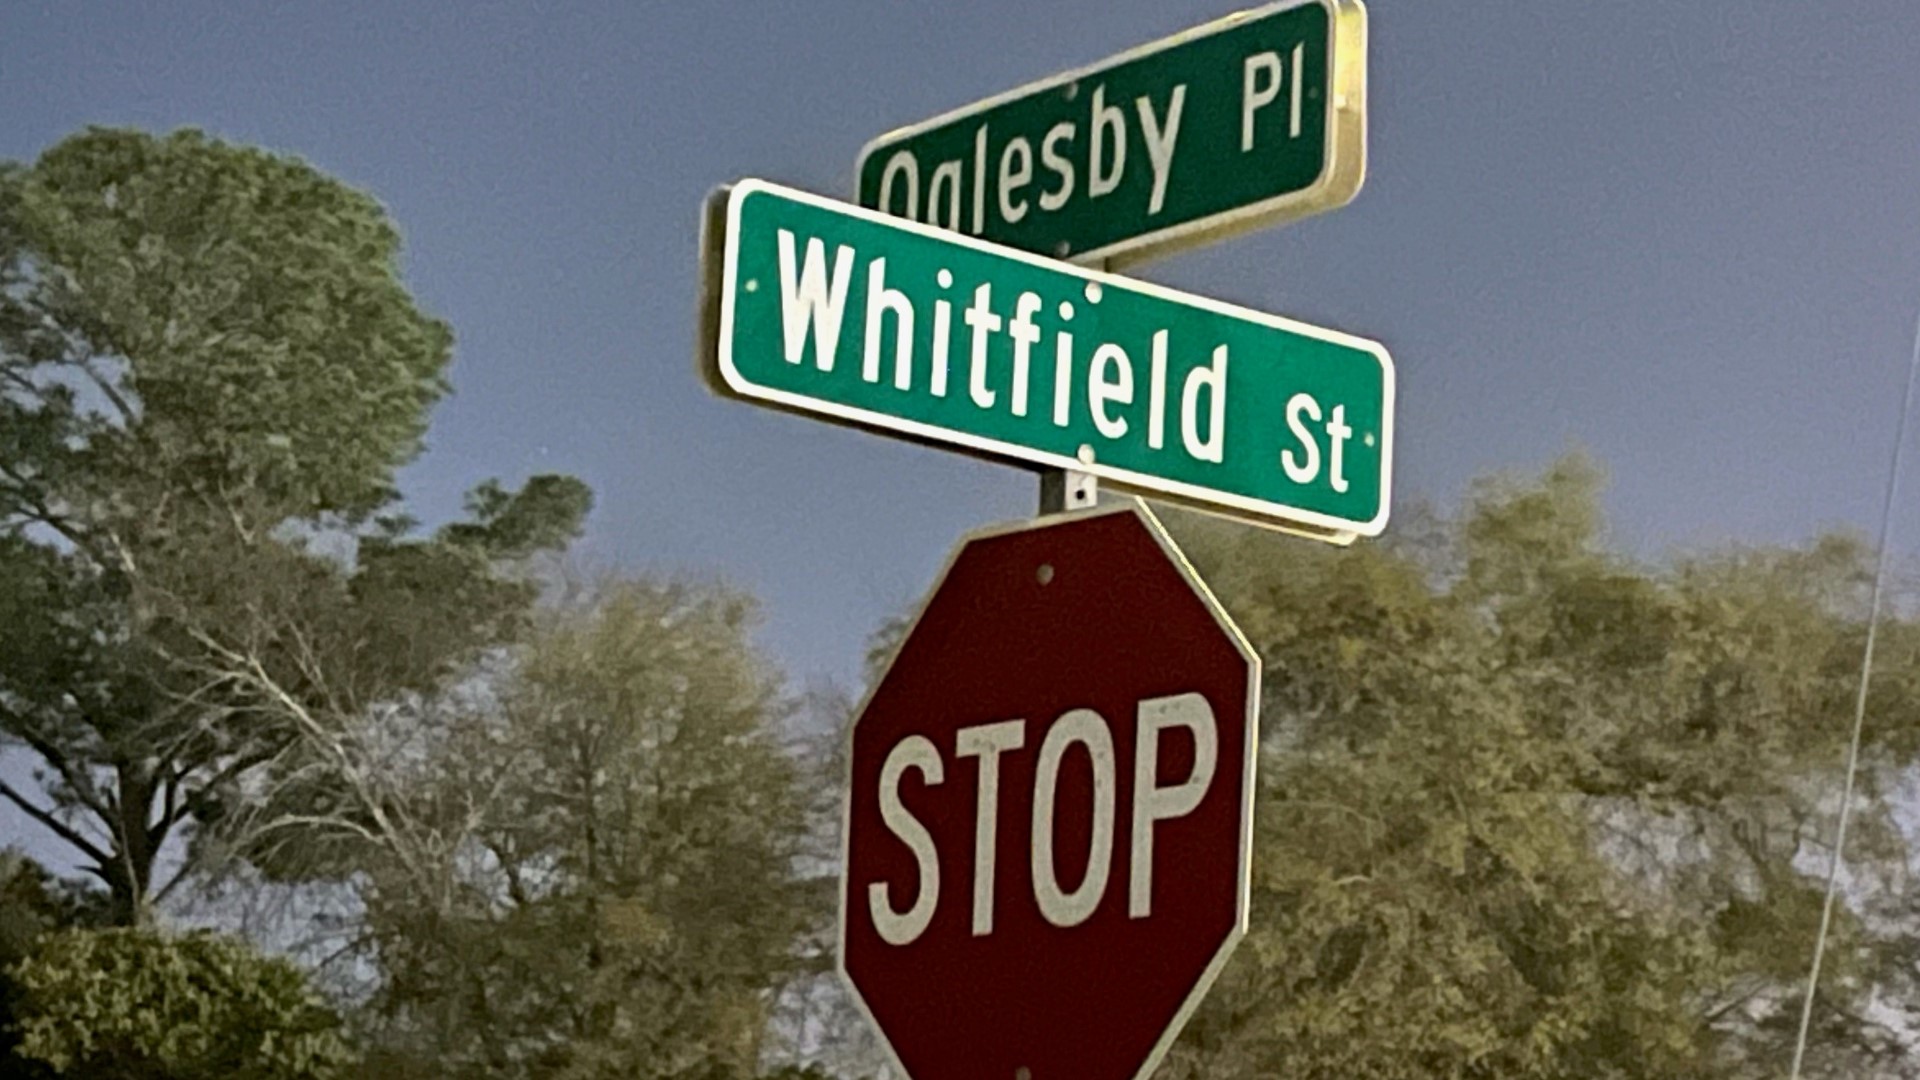 The Bibb County Sheriff's Office says it happened in the 2000 block of Oglesby Place.